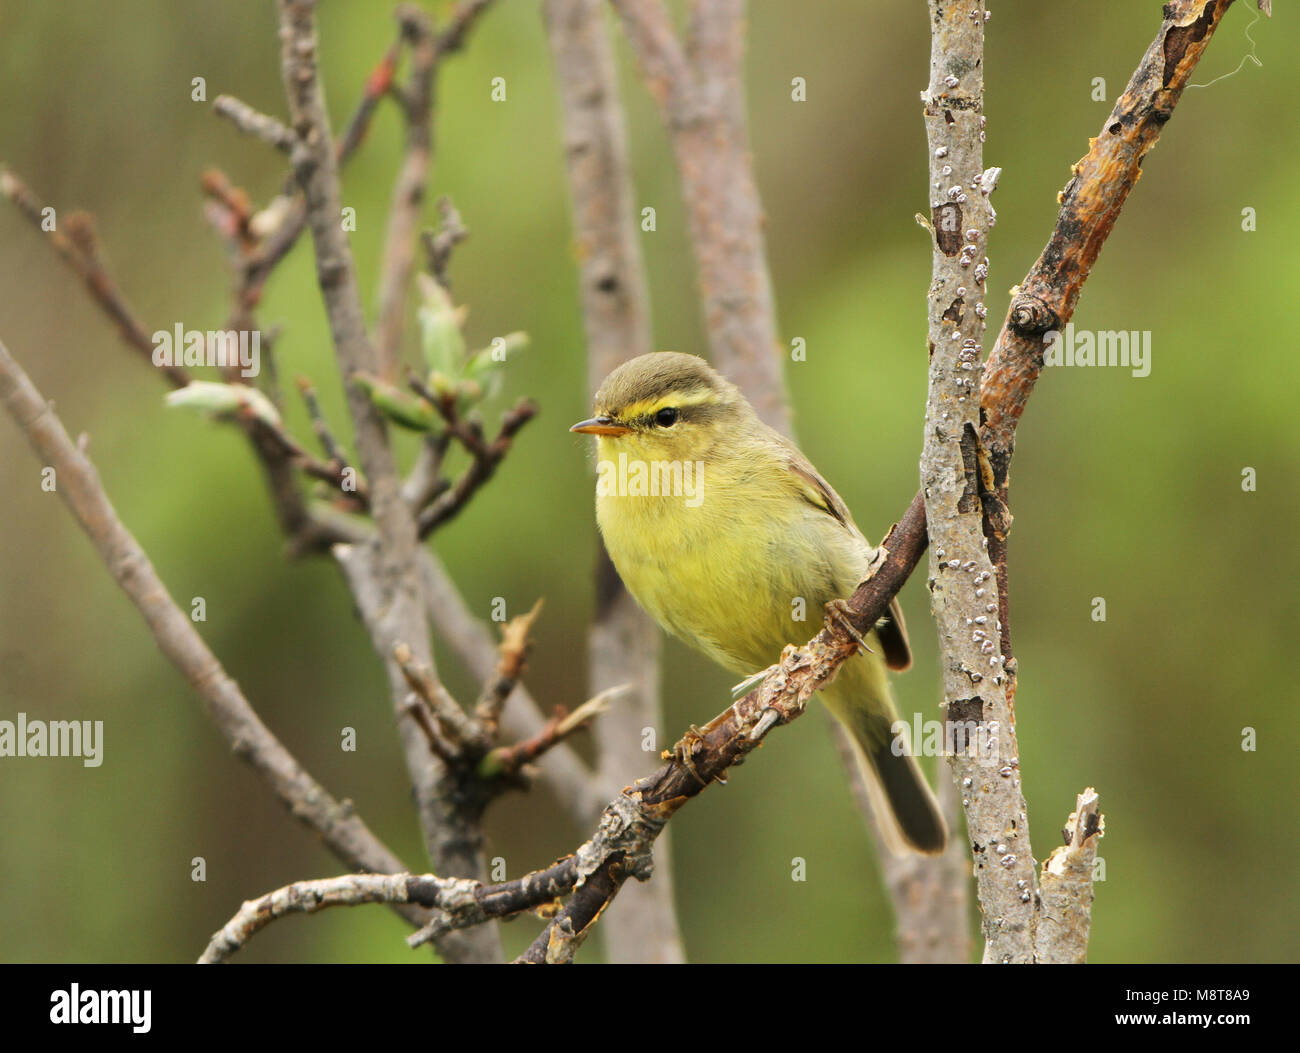 The alpine leaf warbler or west Chinese leaf warbler (Phylloscopus occisinensis) is a species of leaf warbler in the Phylloscopidae family. It is foun Stock Photo